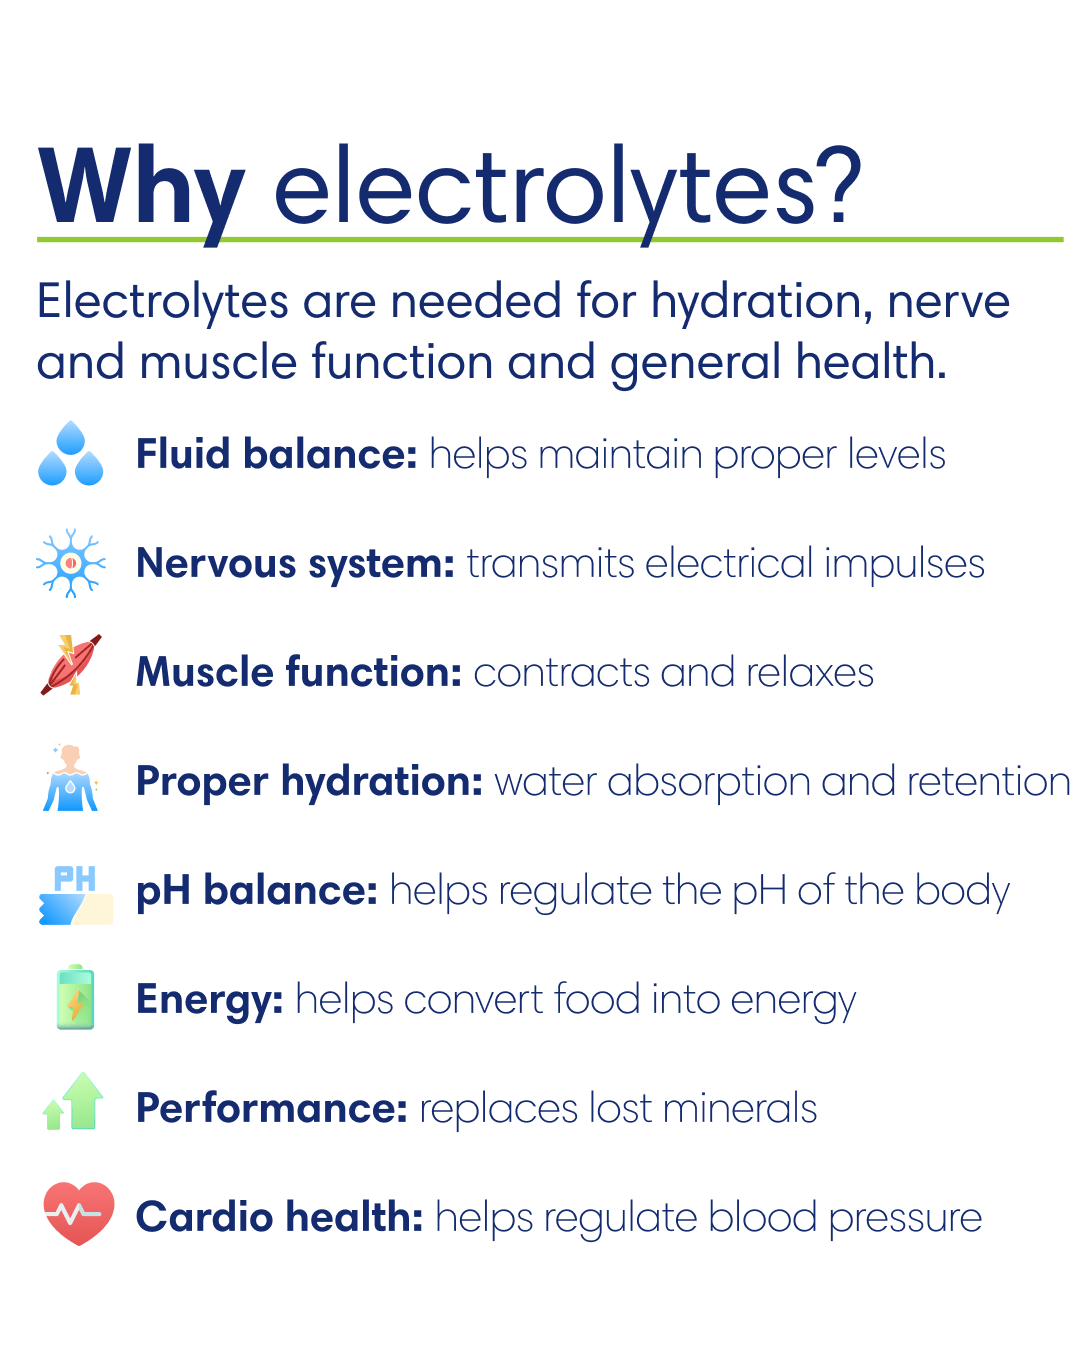 Clearly Electrolytes